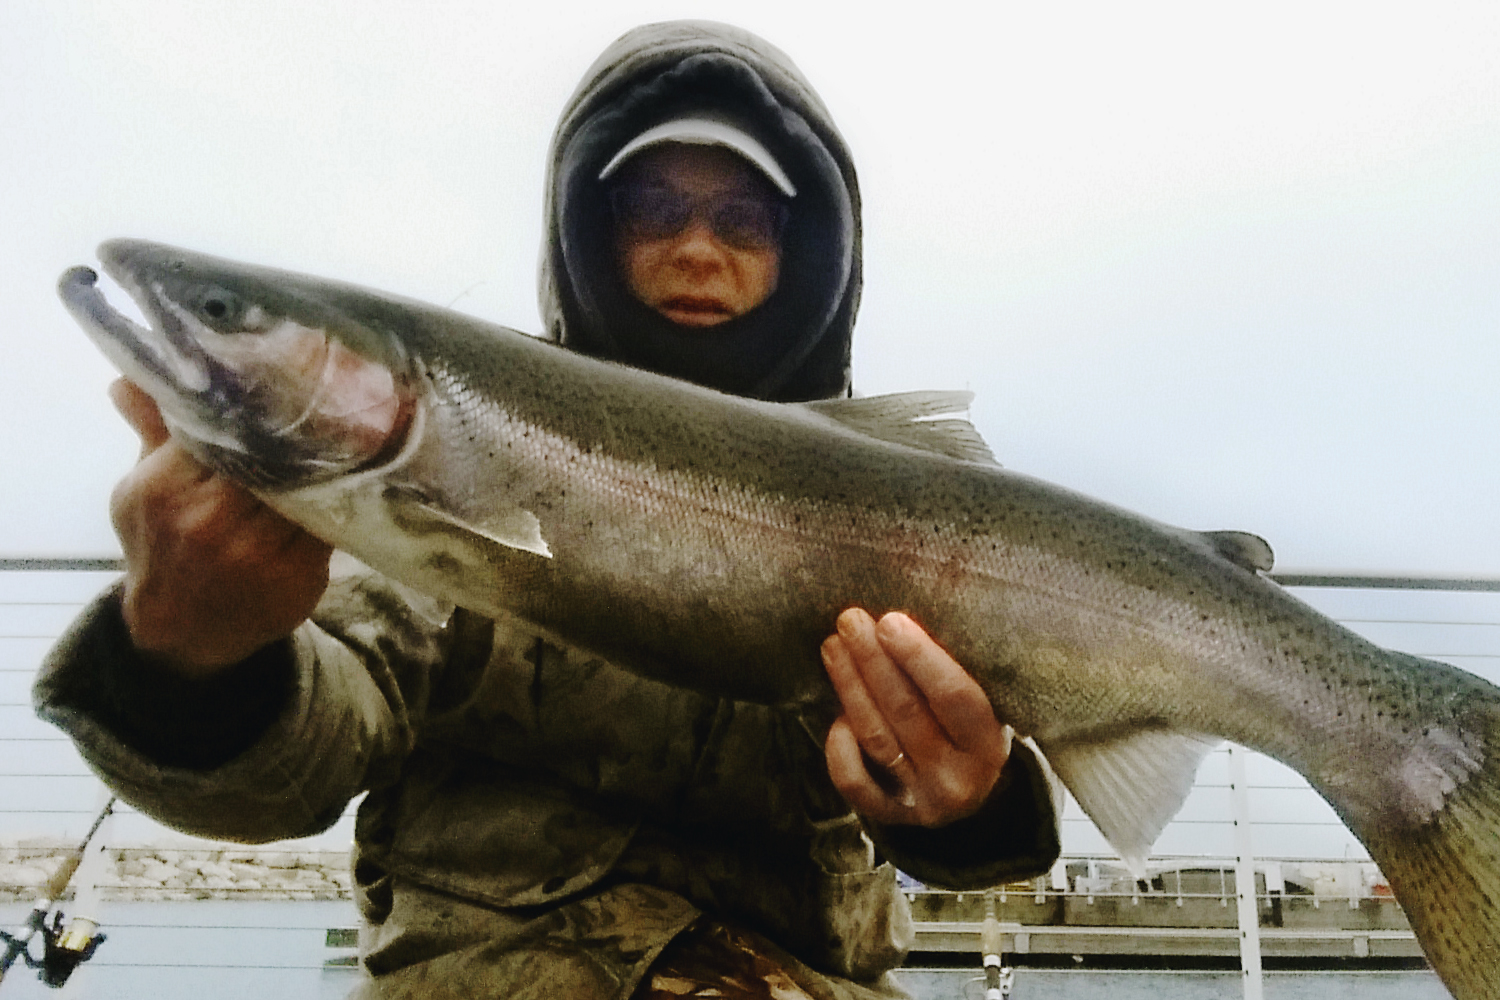 Shore fishing for salmon - Fall fishing with artificial baits